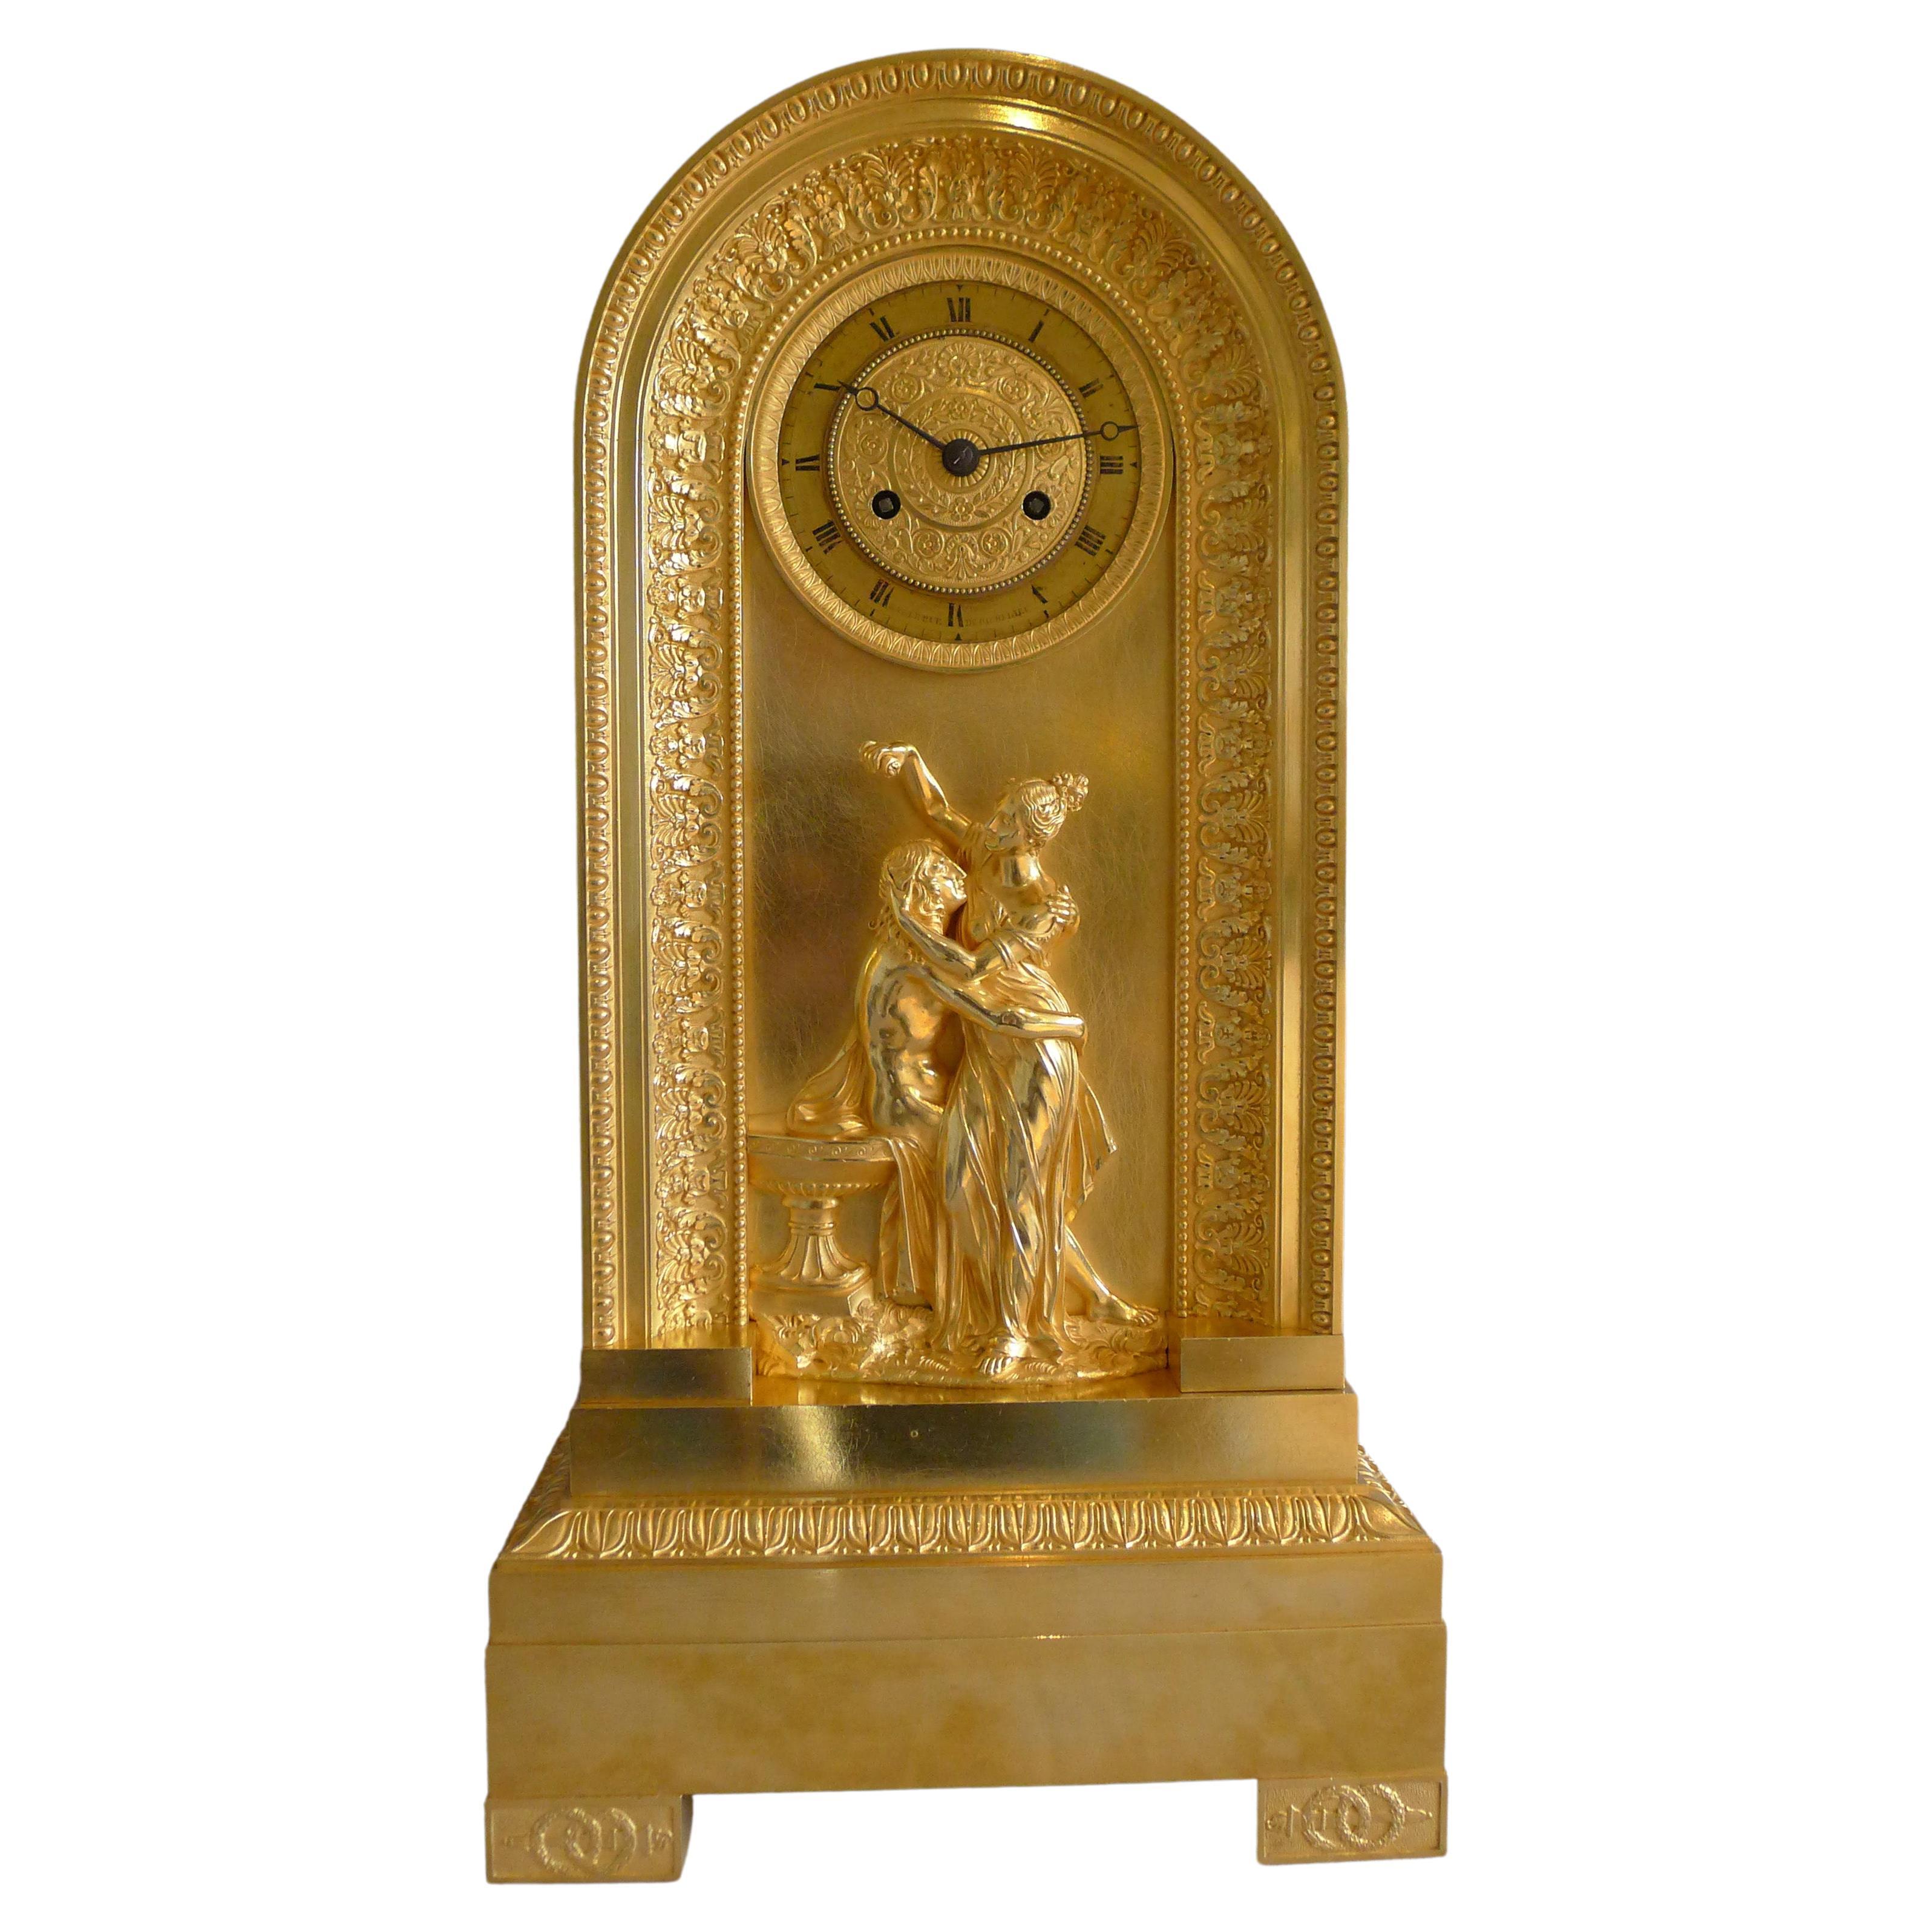 French Empire Ormolu Clock of Borne Shape and of Hero and Leander